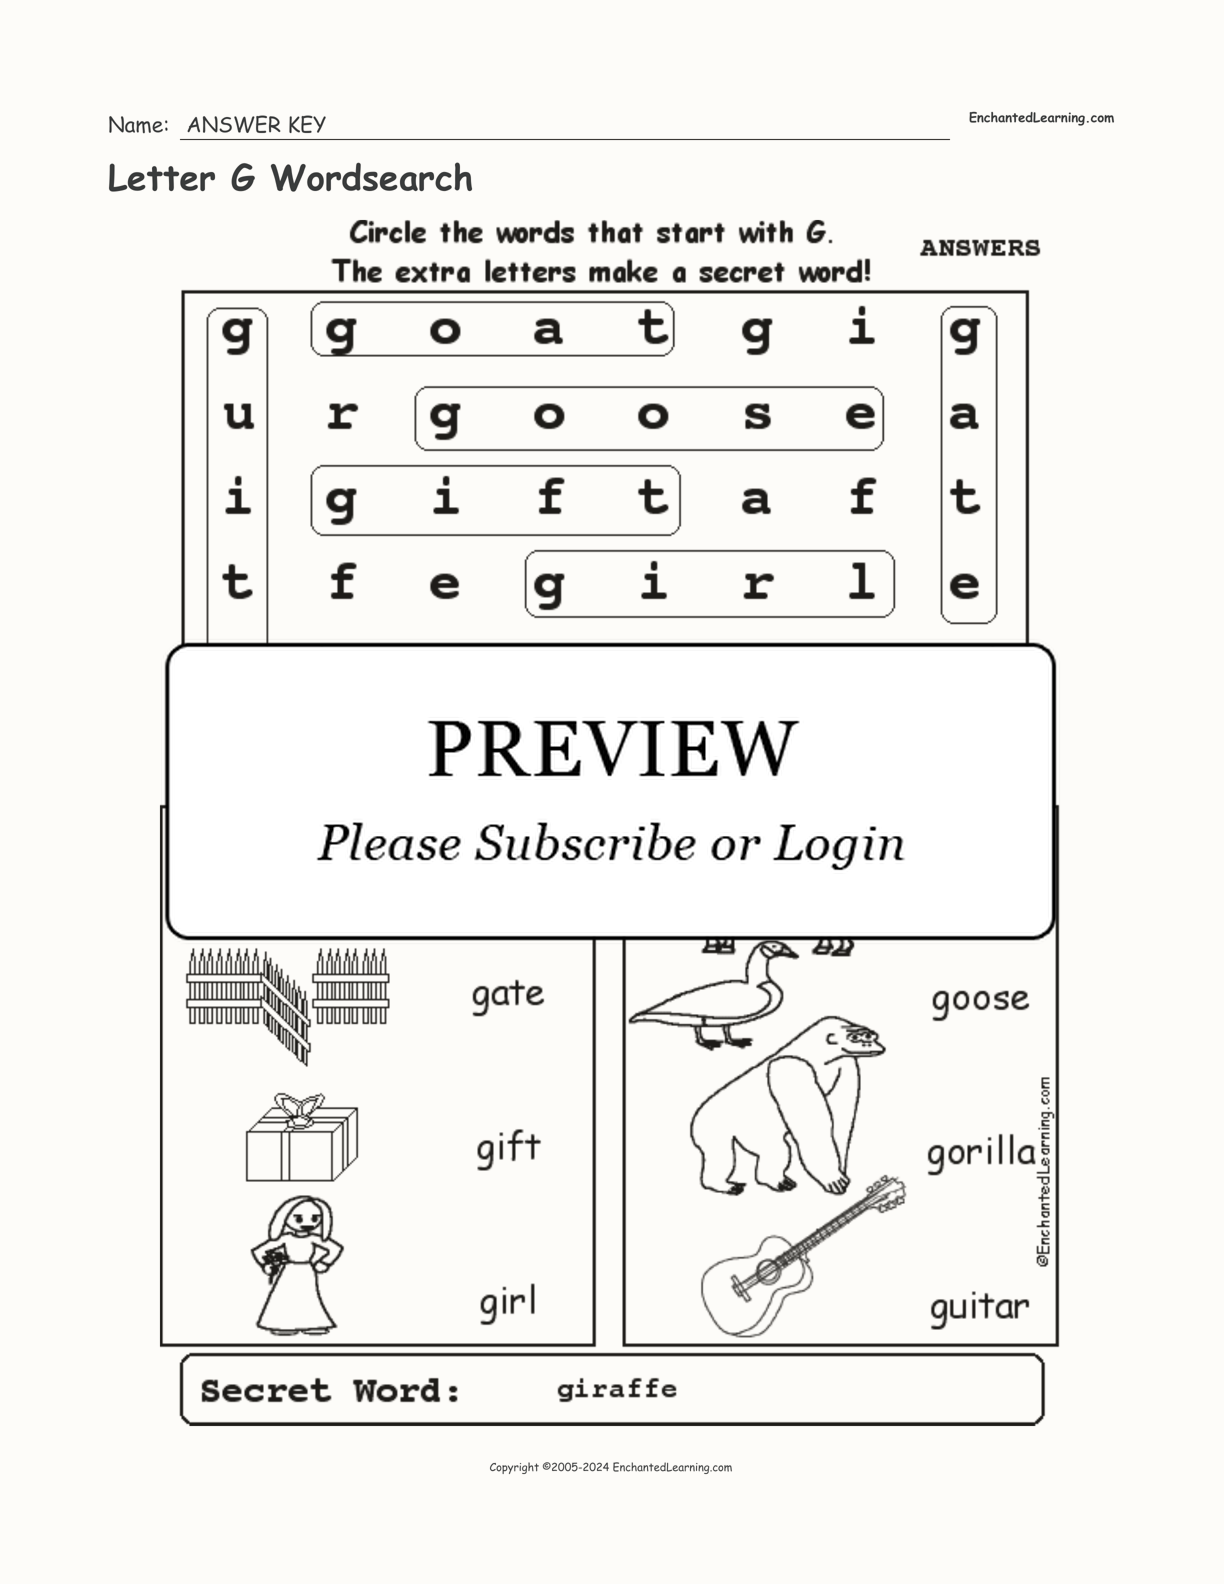 Letter G Wordsearch interactive worksheet page 2